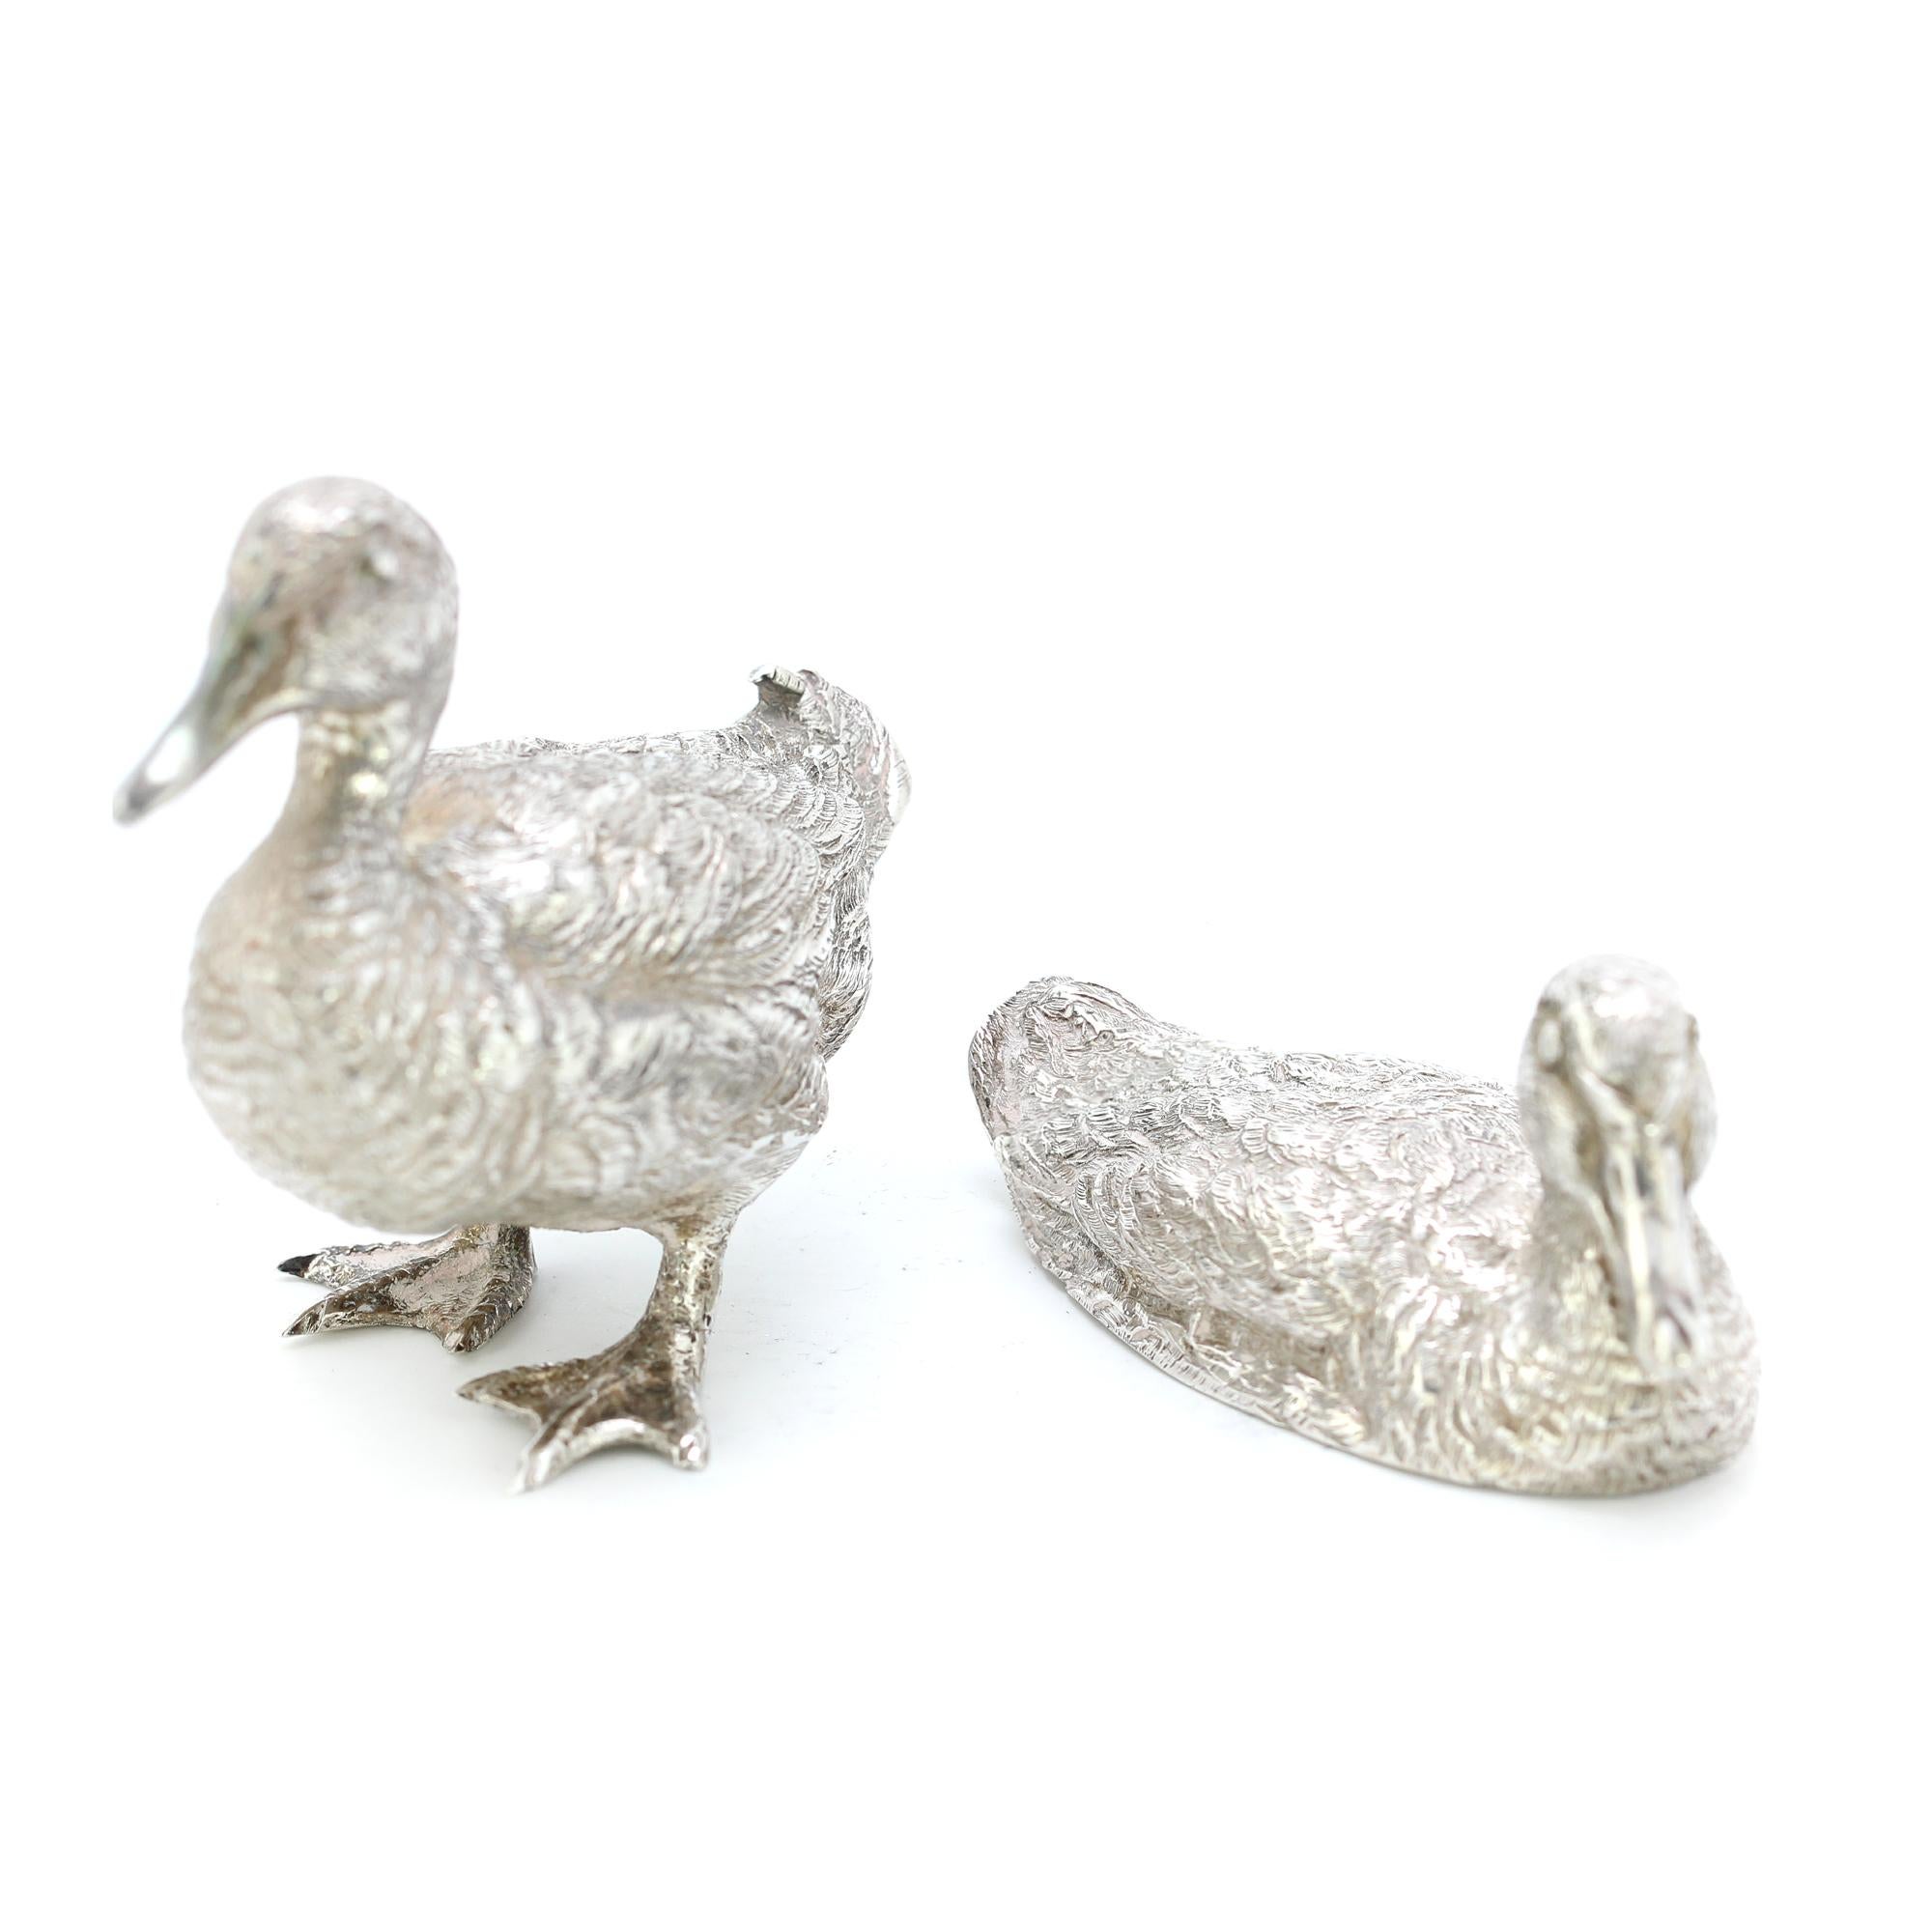 Sterling silver detailed pair of duck figurines
Maker: C F Hancock & Co
Made in London 1973
Fully hallmarked.

Dimensions - 
Size 1 standing duck: 6.5 x 3.2 x 5.5 cm
Size 2 sitting duck: 6.7 x 2.7 x 3 cm
Weight : 159 grams